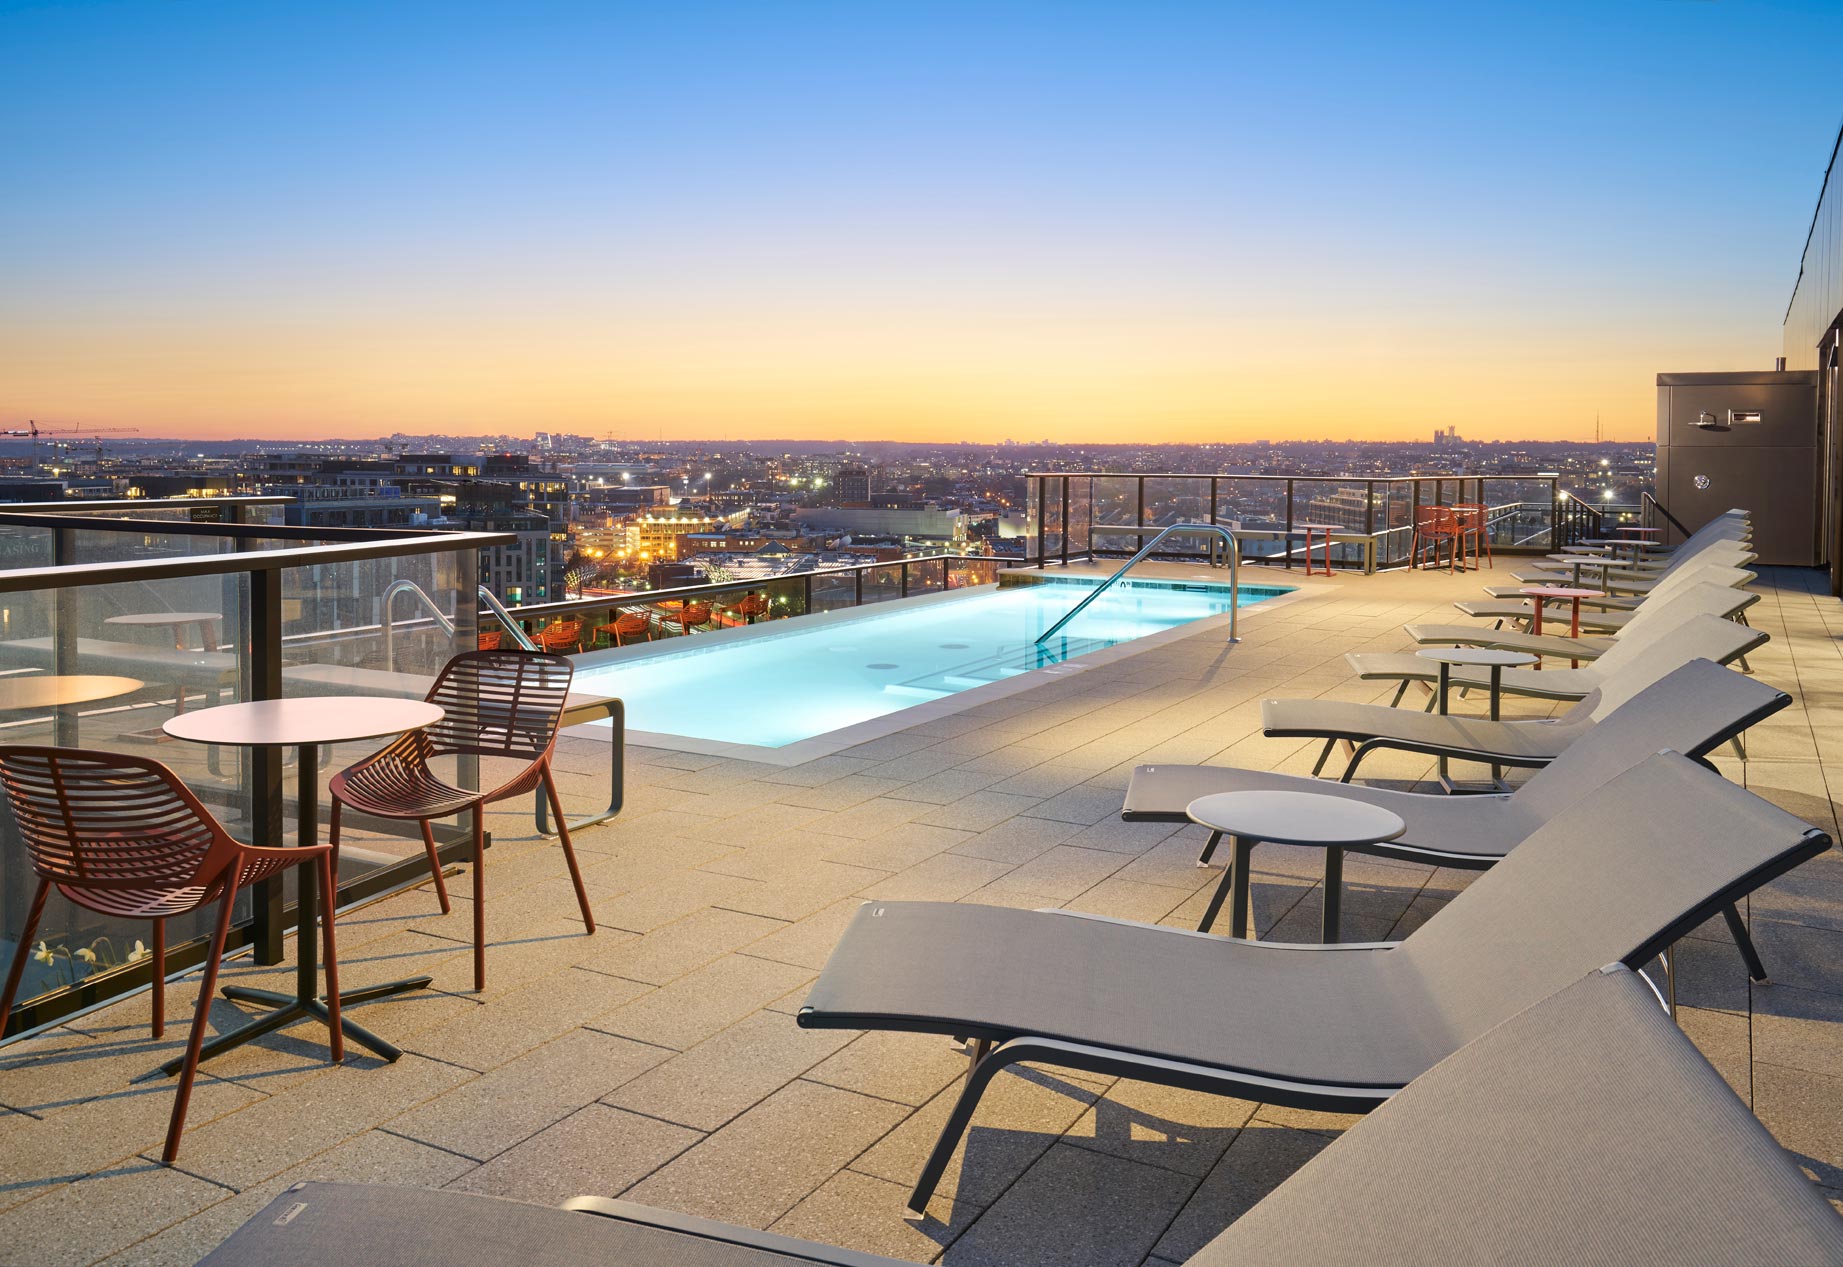 The MO Rooftop Pool and View of Union Market District